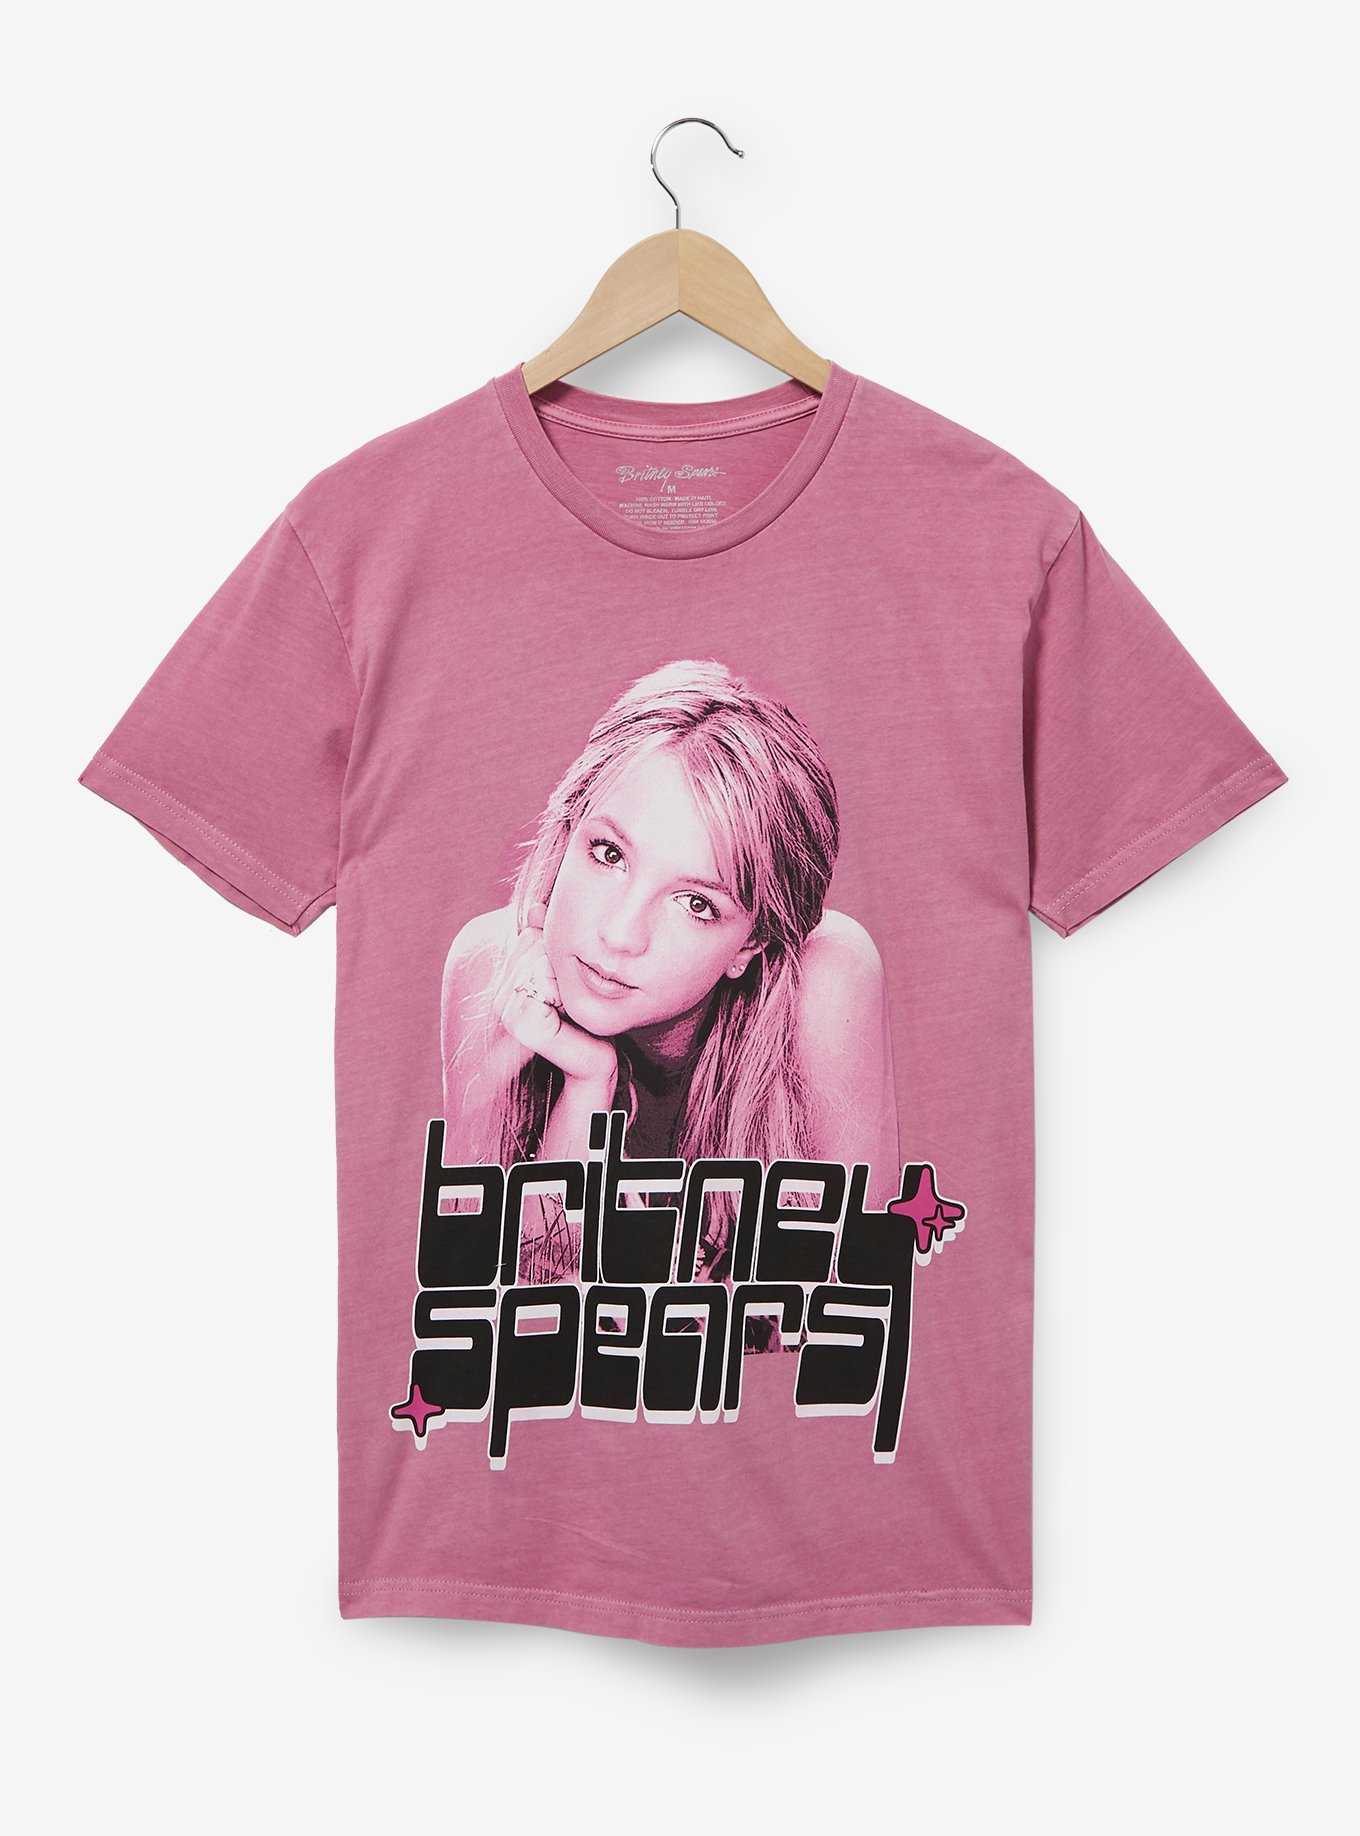 Britney Spears Tonal Portrait T-Shirt - BoxLunch Exclusive | BoxLunch